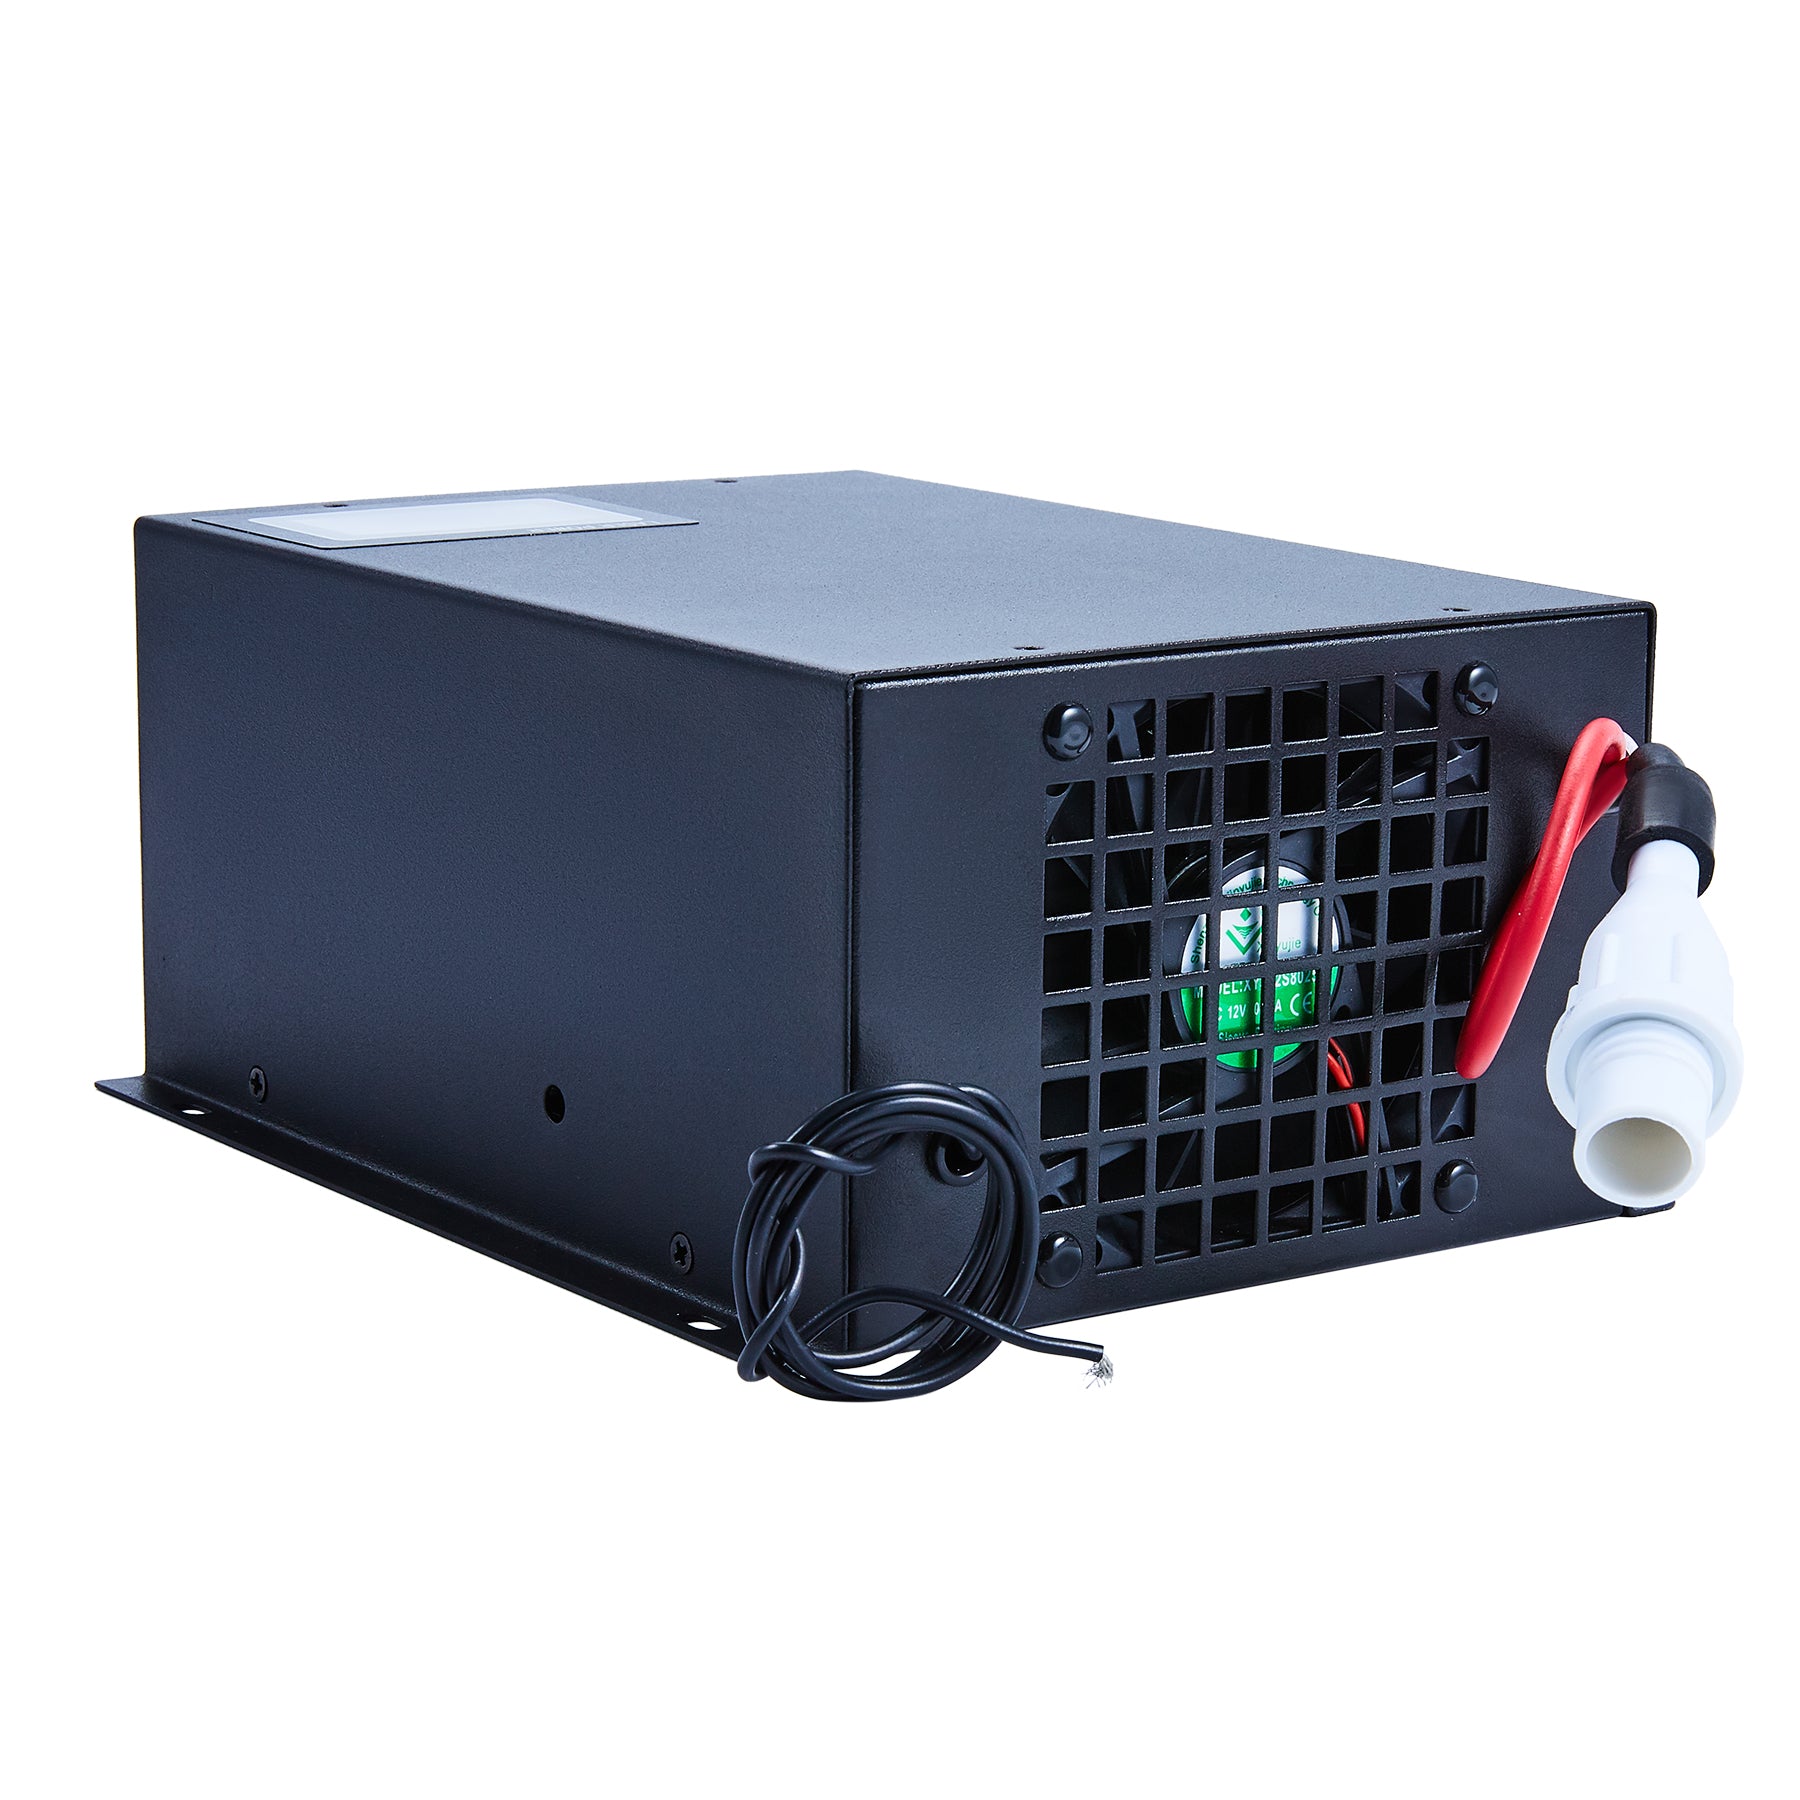 60W Laser Power Supply for CO2 Laser Engraver Cutting Machine | LN-60